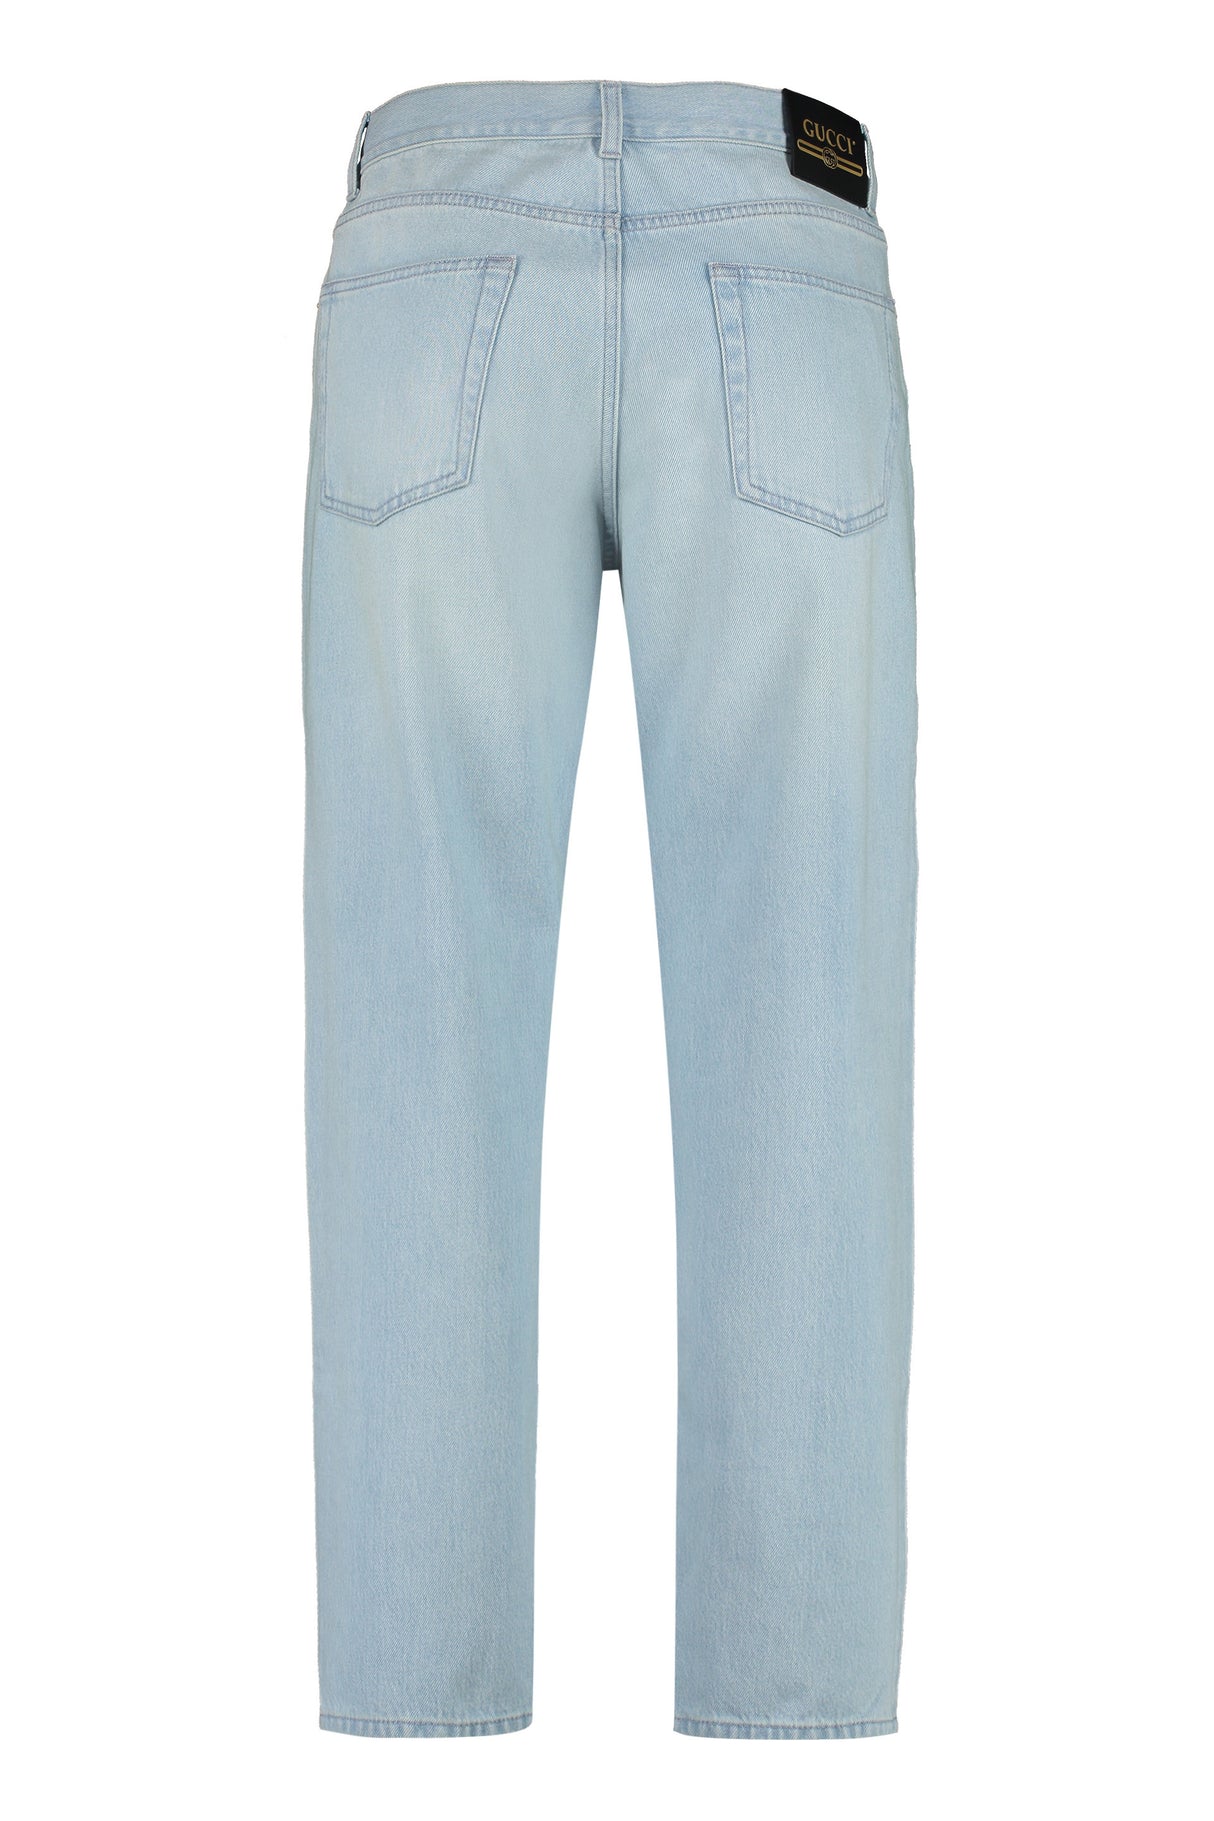 GUCCI Stylish Light Blue Carrot Pants for Men - SS23 Collection